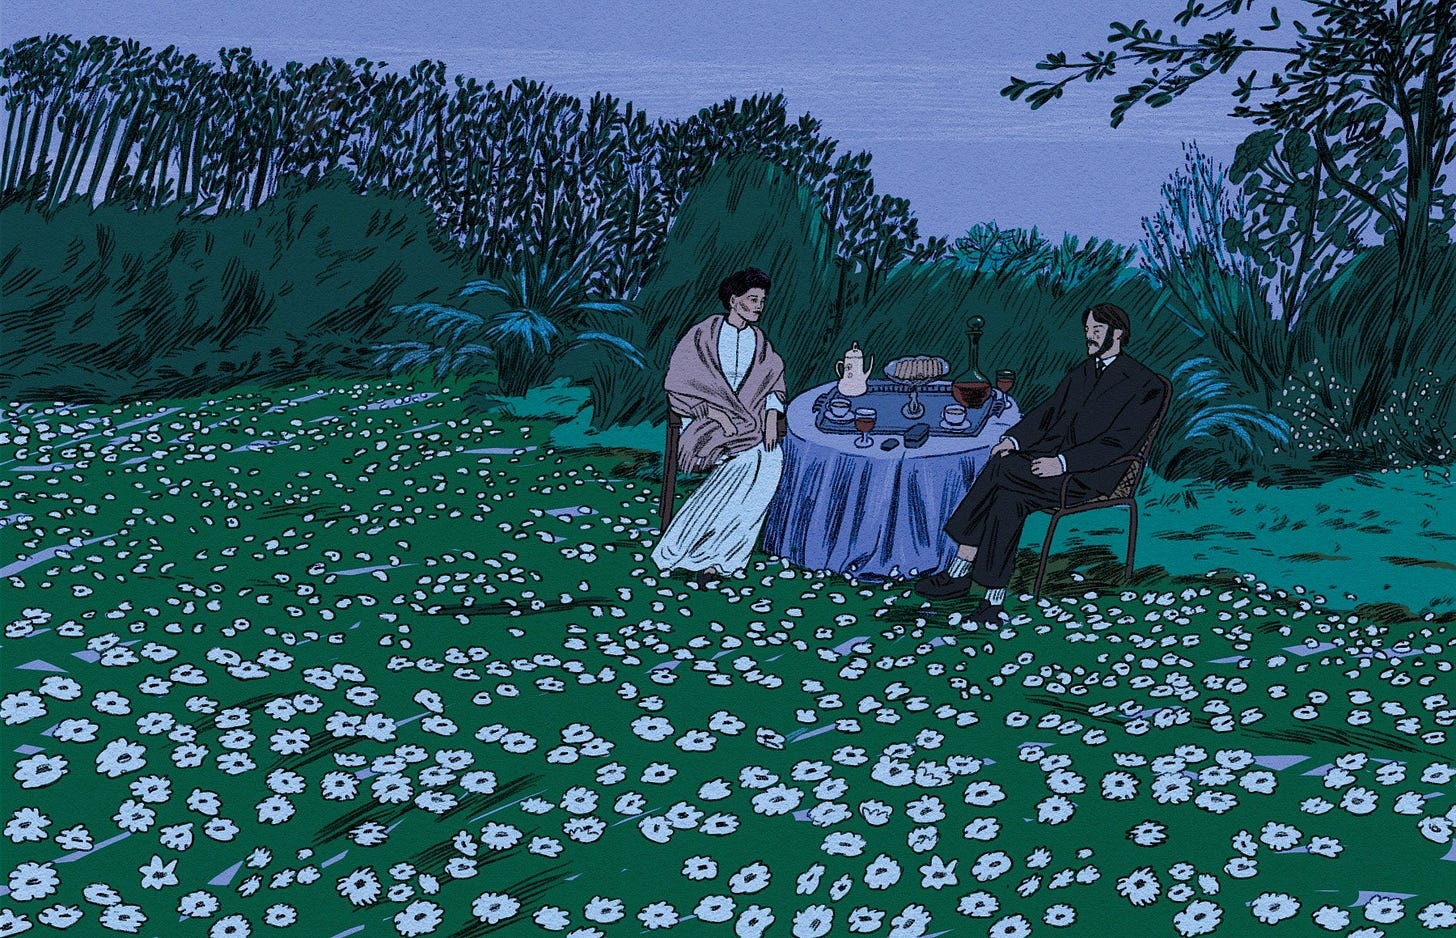 Two people dining in a field of flowers.